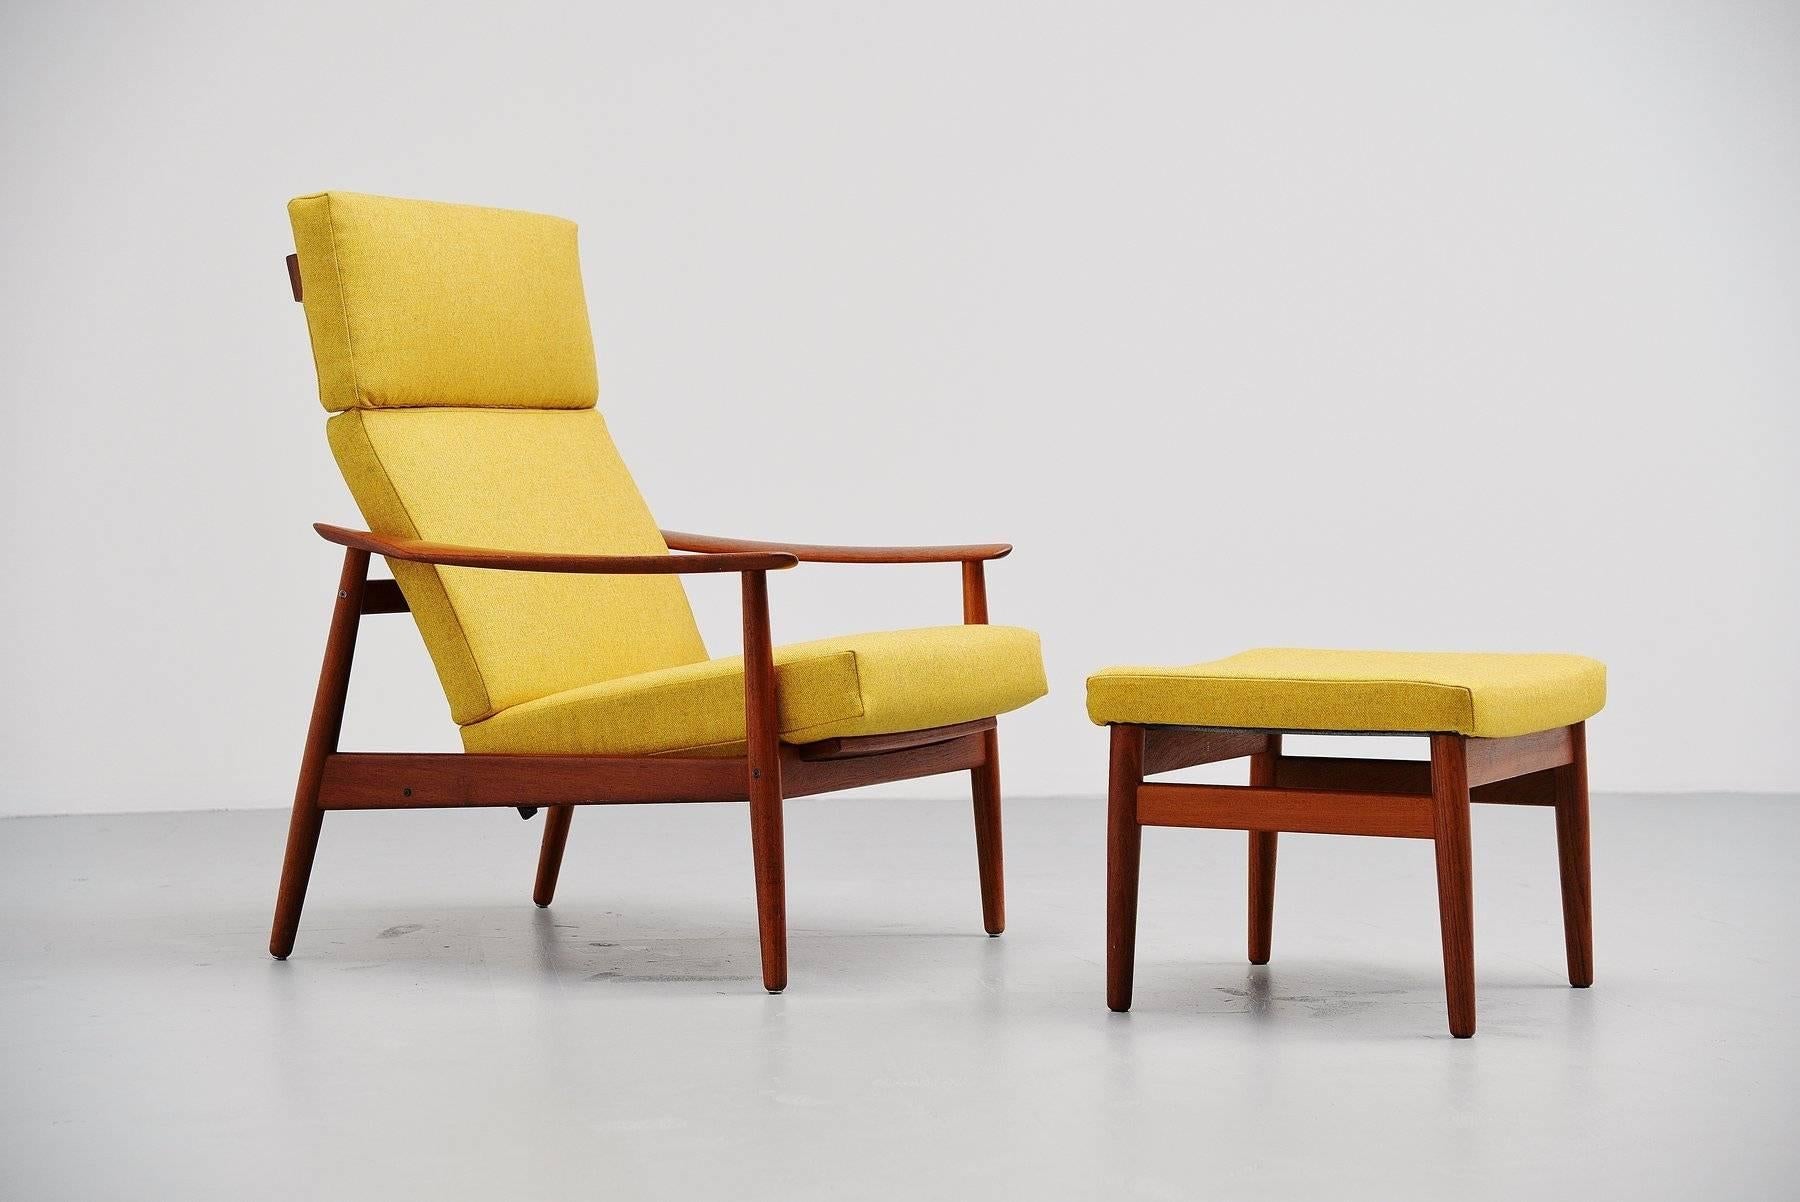 Very nice reclining chair model FD164 designed by Arne Vodder for France & Son, Denmark 1962. This chair was made in solid teak and we newly upholstered it with a very nice bright yellow upholstery. The cushions were still in tact with the spring